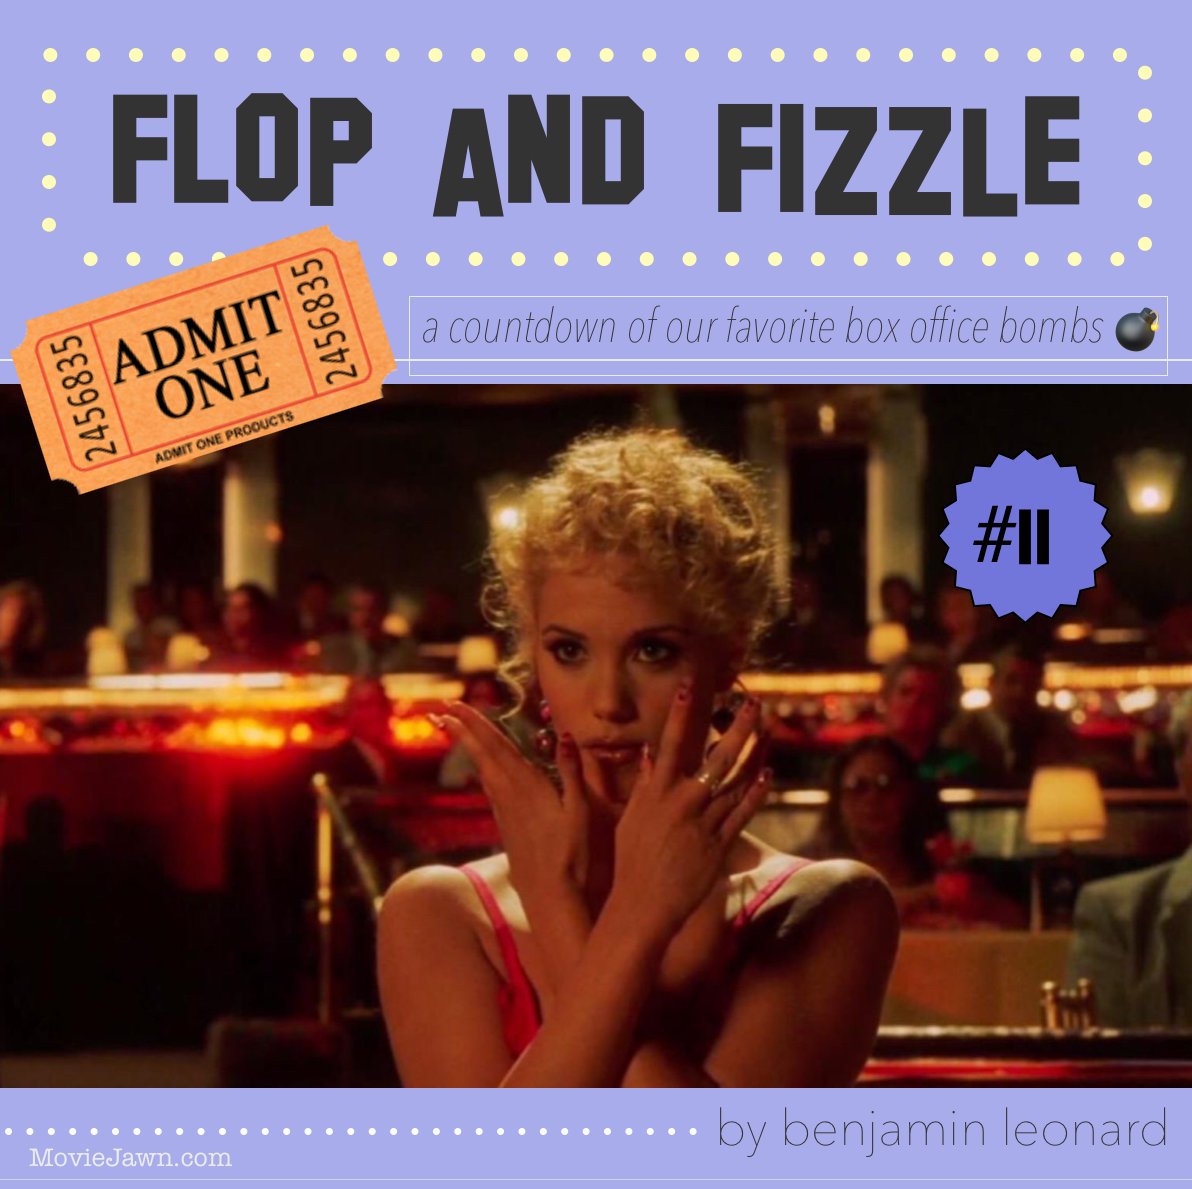 Flop and Fizzle #11 SHOWGIRLS is an evergreen look at women under capitalism — Moviejawn image pic photo